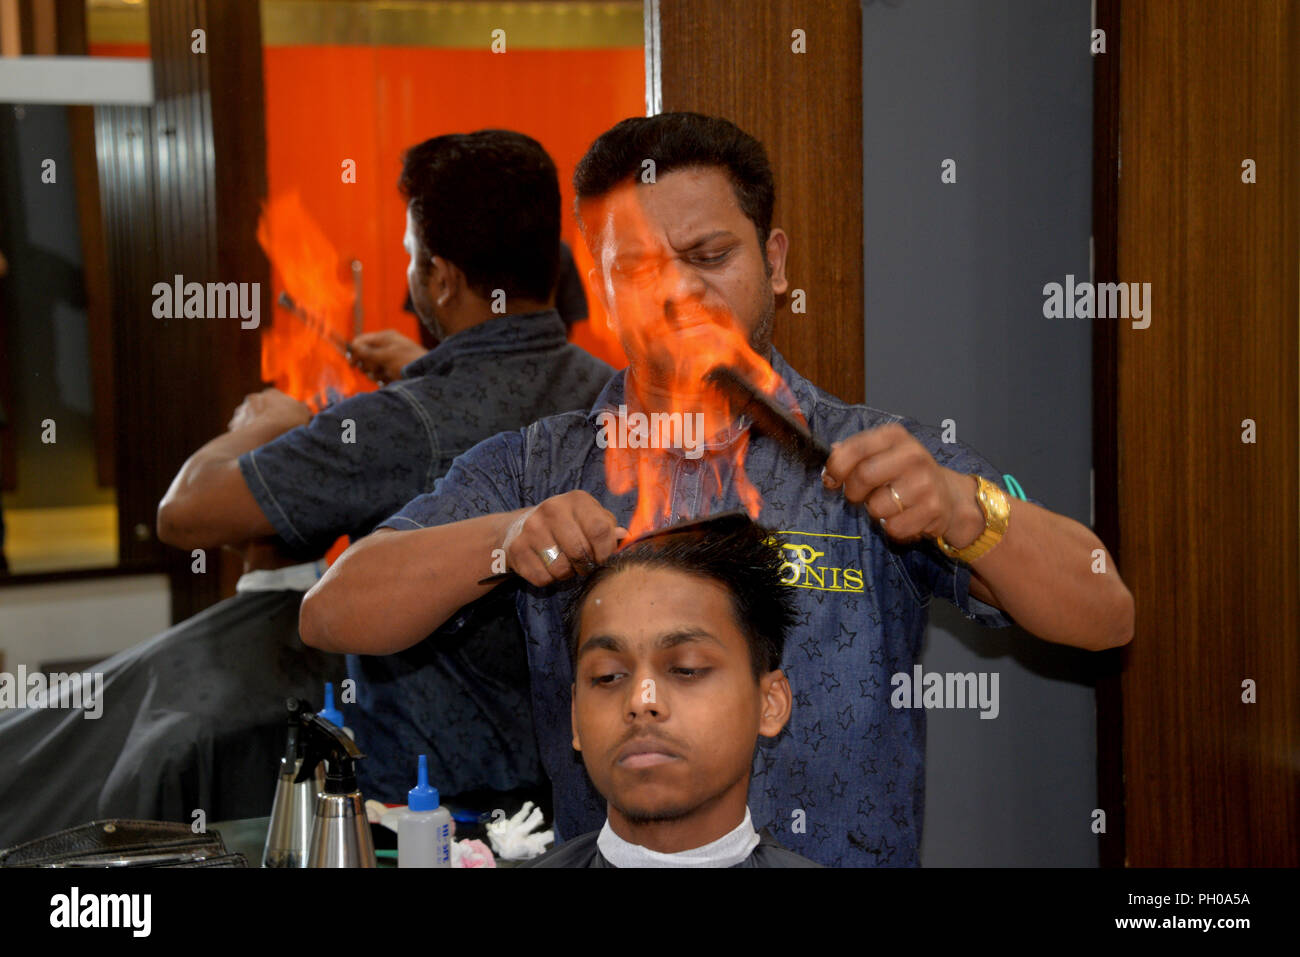 Dhaka, Bangladesh. 29th Aug, 2018. A barber uses fire to straighten a man's  hair at a salon in Dhaka, Bangladesh on Aug. 29, 2018. Hair burning is  becoming a new sensation for